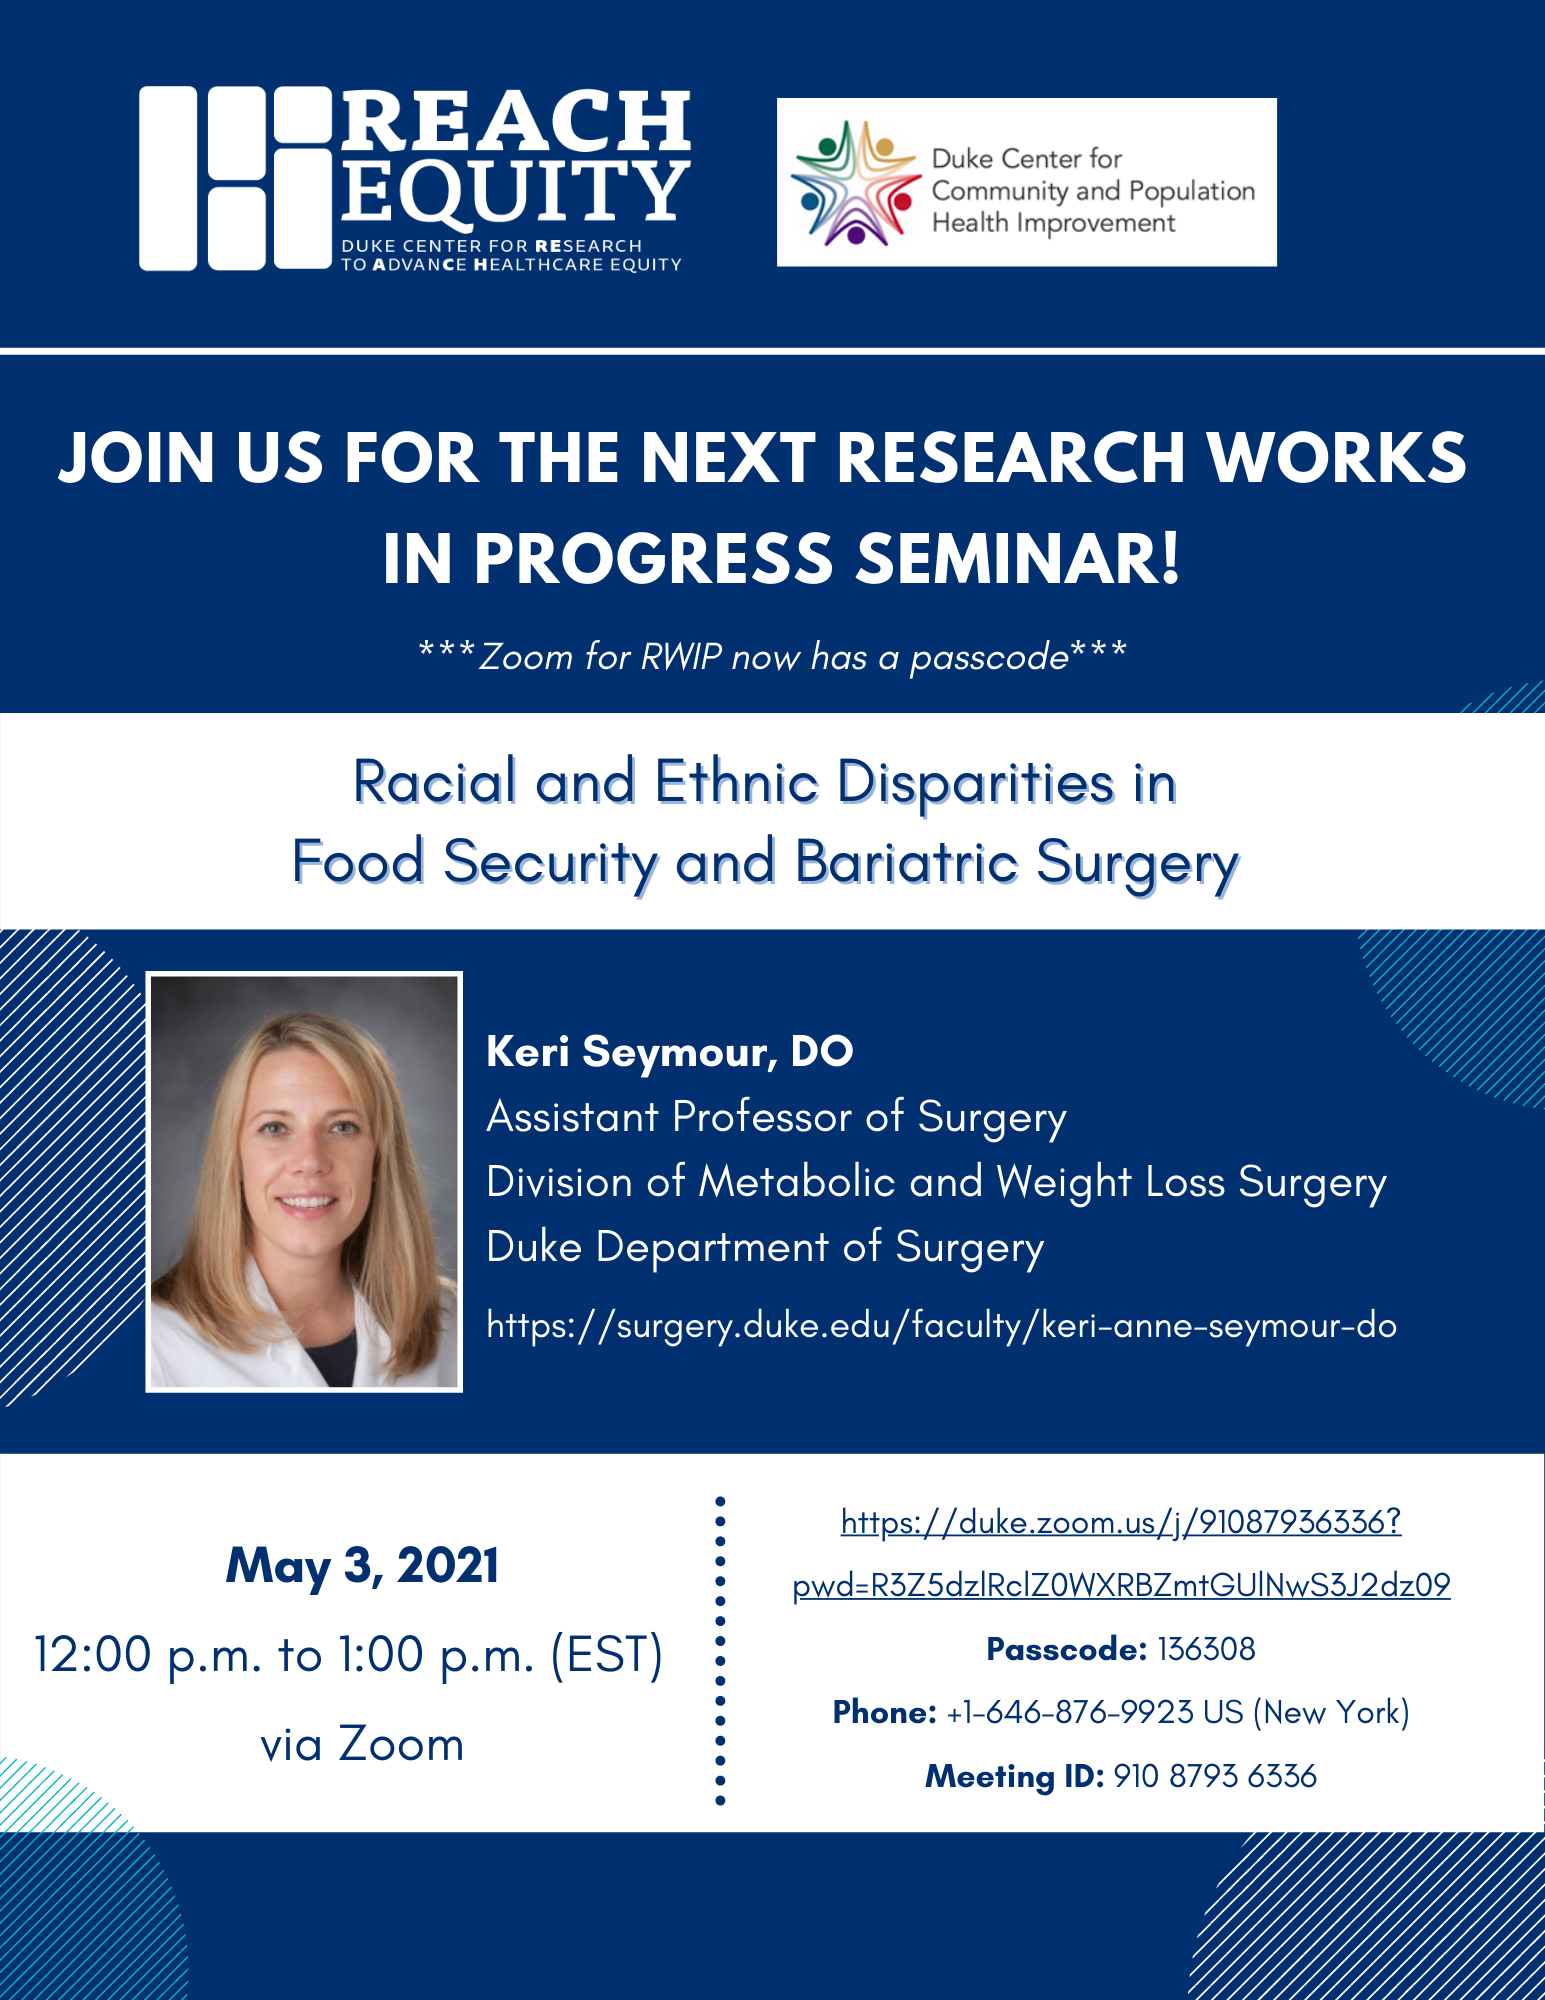 Racial and Ethnic Disparities in  Food Security and Bariatric Surgery presentation by Dr. Keri Seymour at Health Disparities Research Works in Progress via Zoom on May 3 at 12:00 p.m.